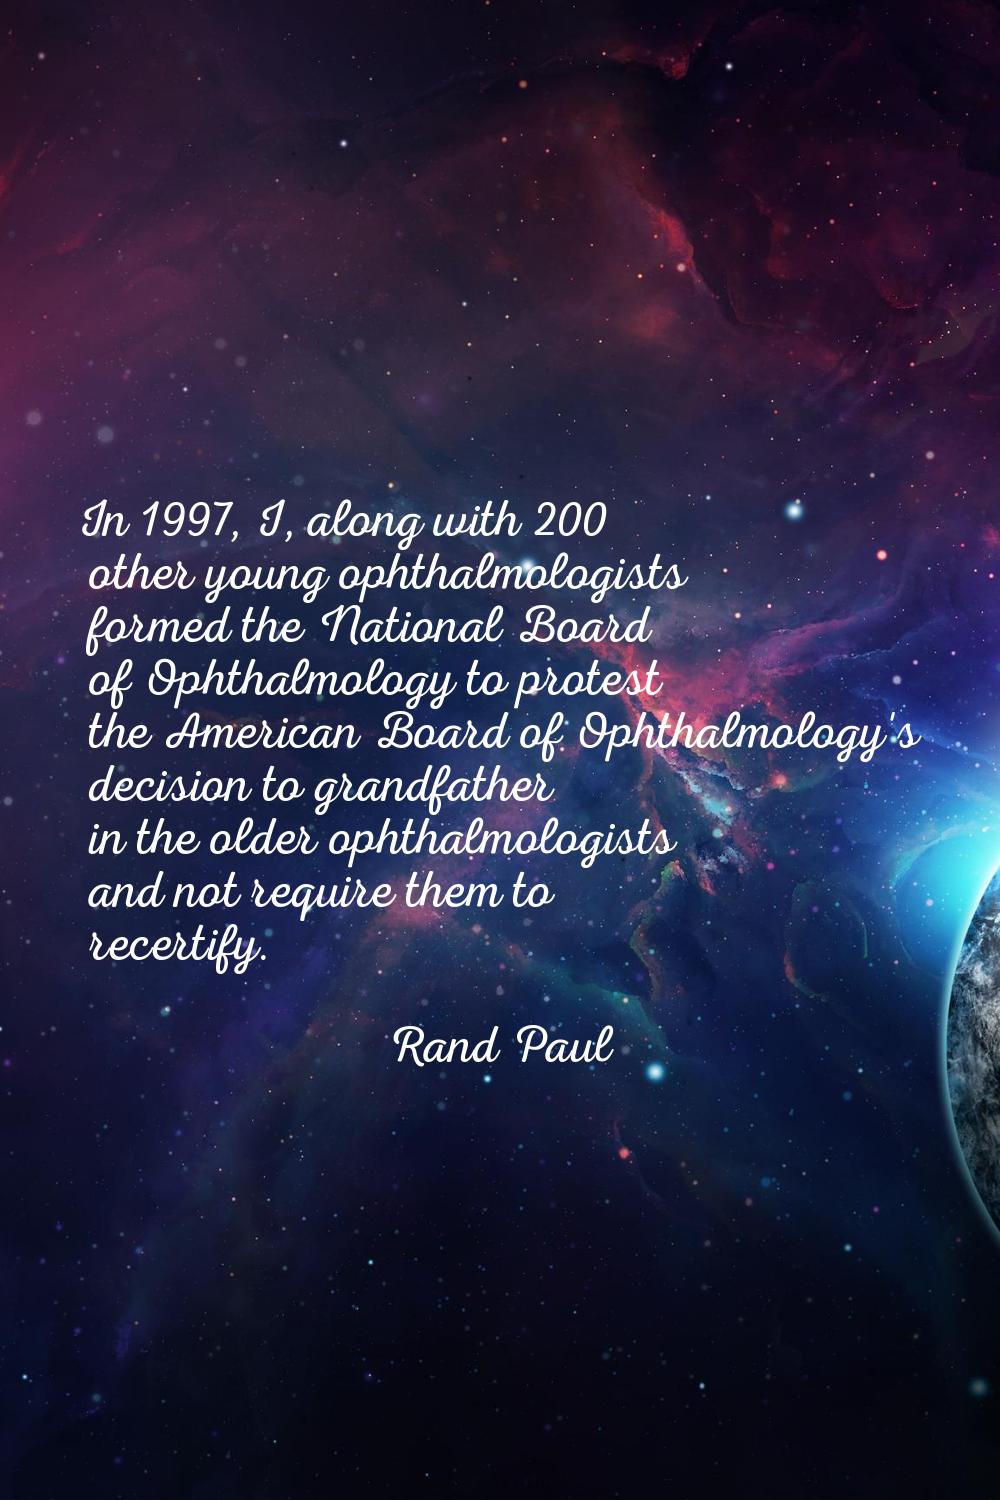 In 1997, I, along with 200 other young ophthalmologists formed the National Board of Ophthalmology 